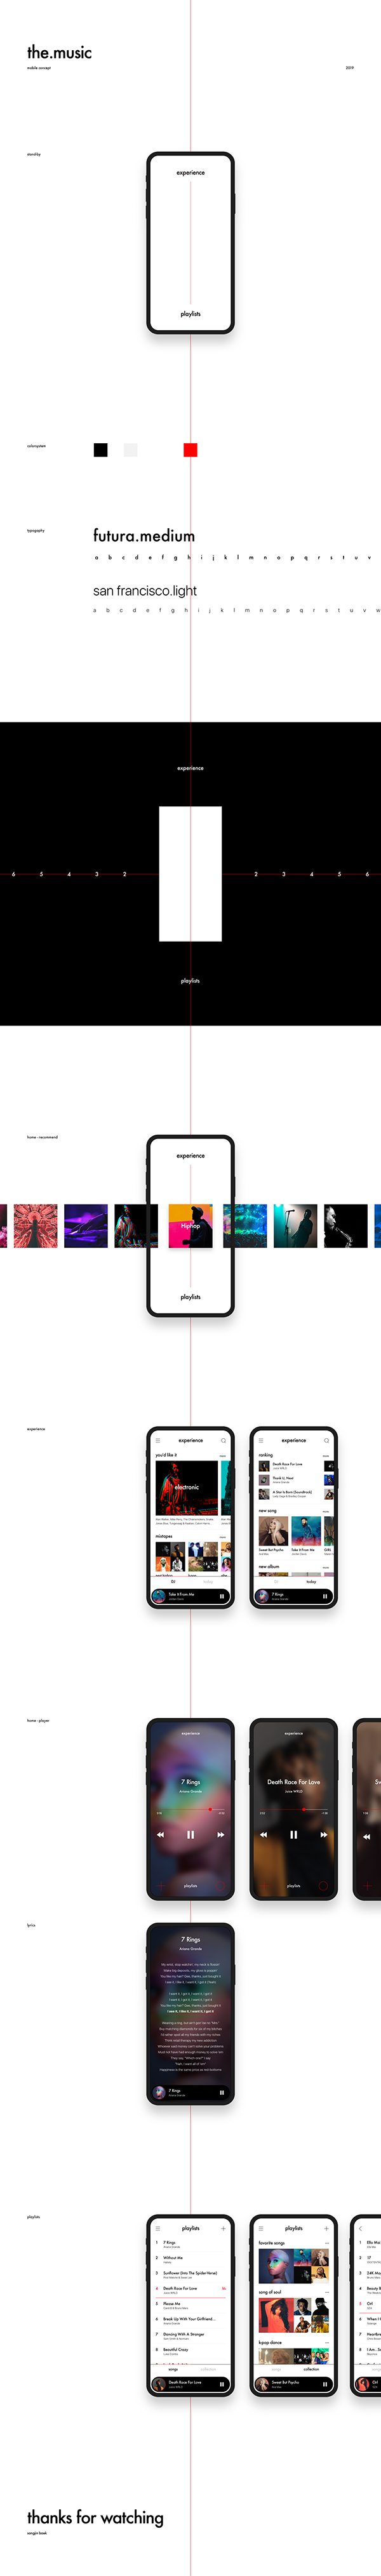 the.music - mobile app concept